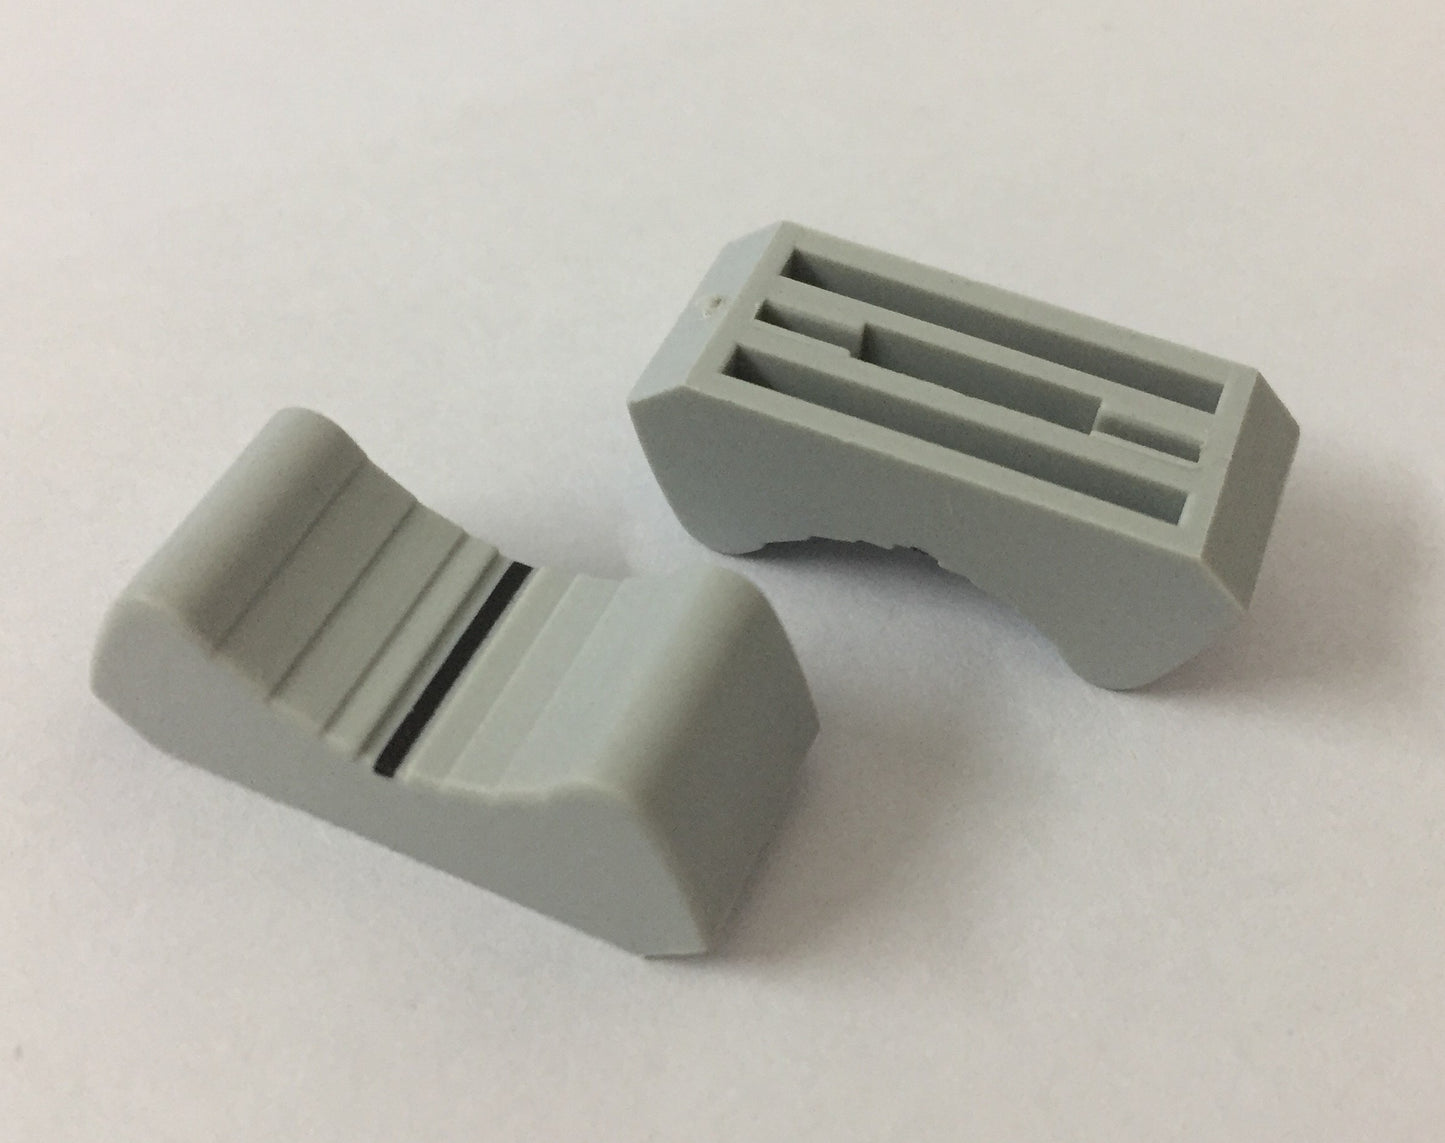 Fader caps knobs  for T tang 18.5mm Alps faders Soundcraft etc pack of 2